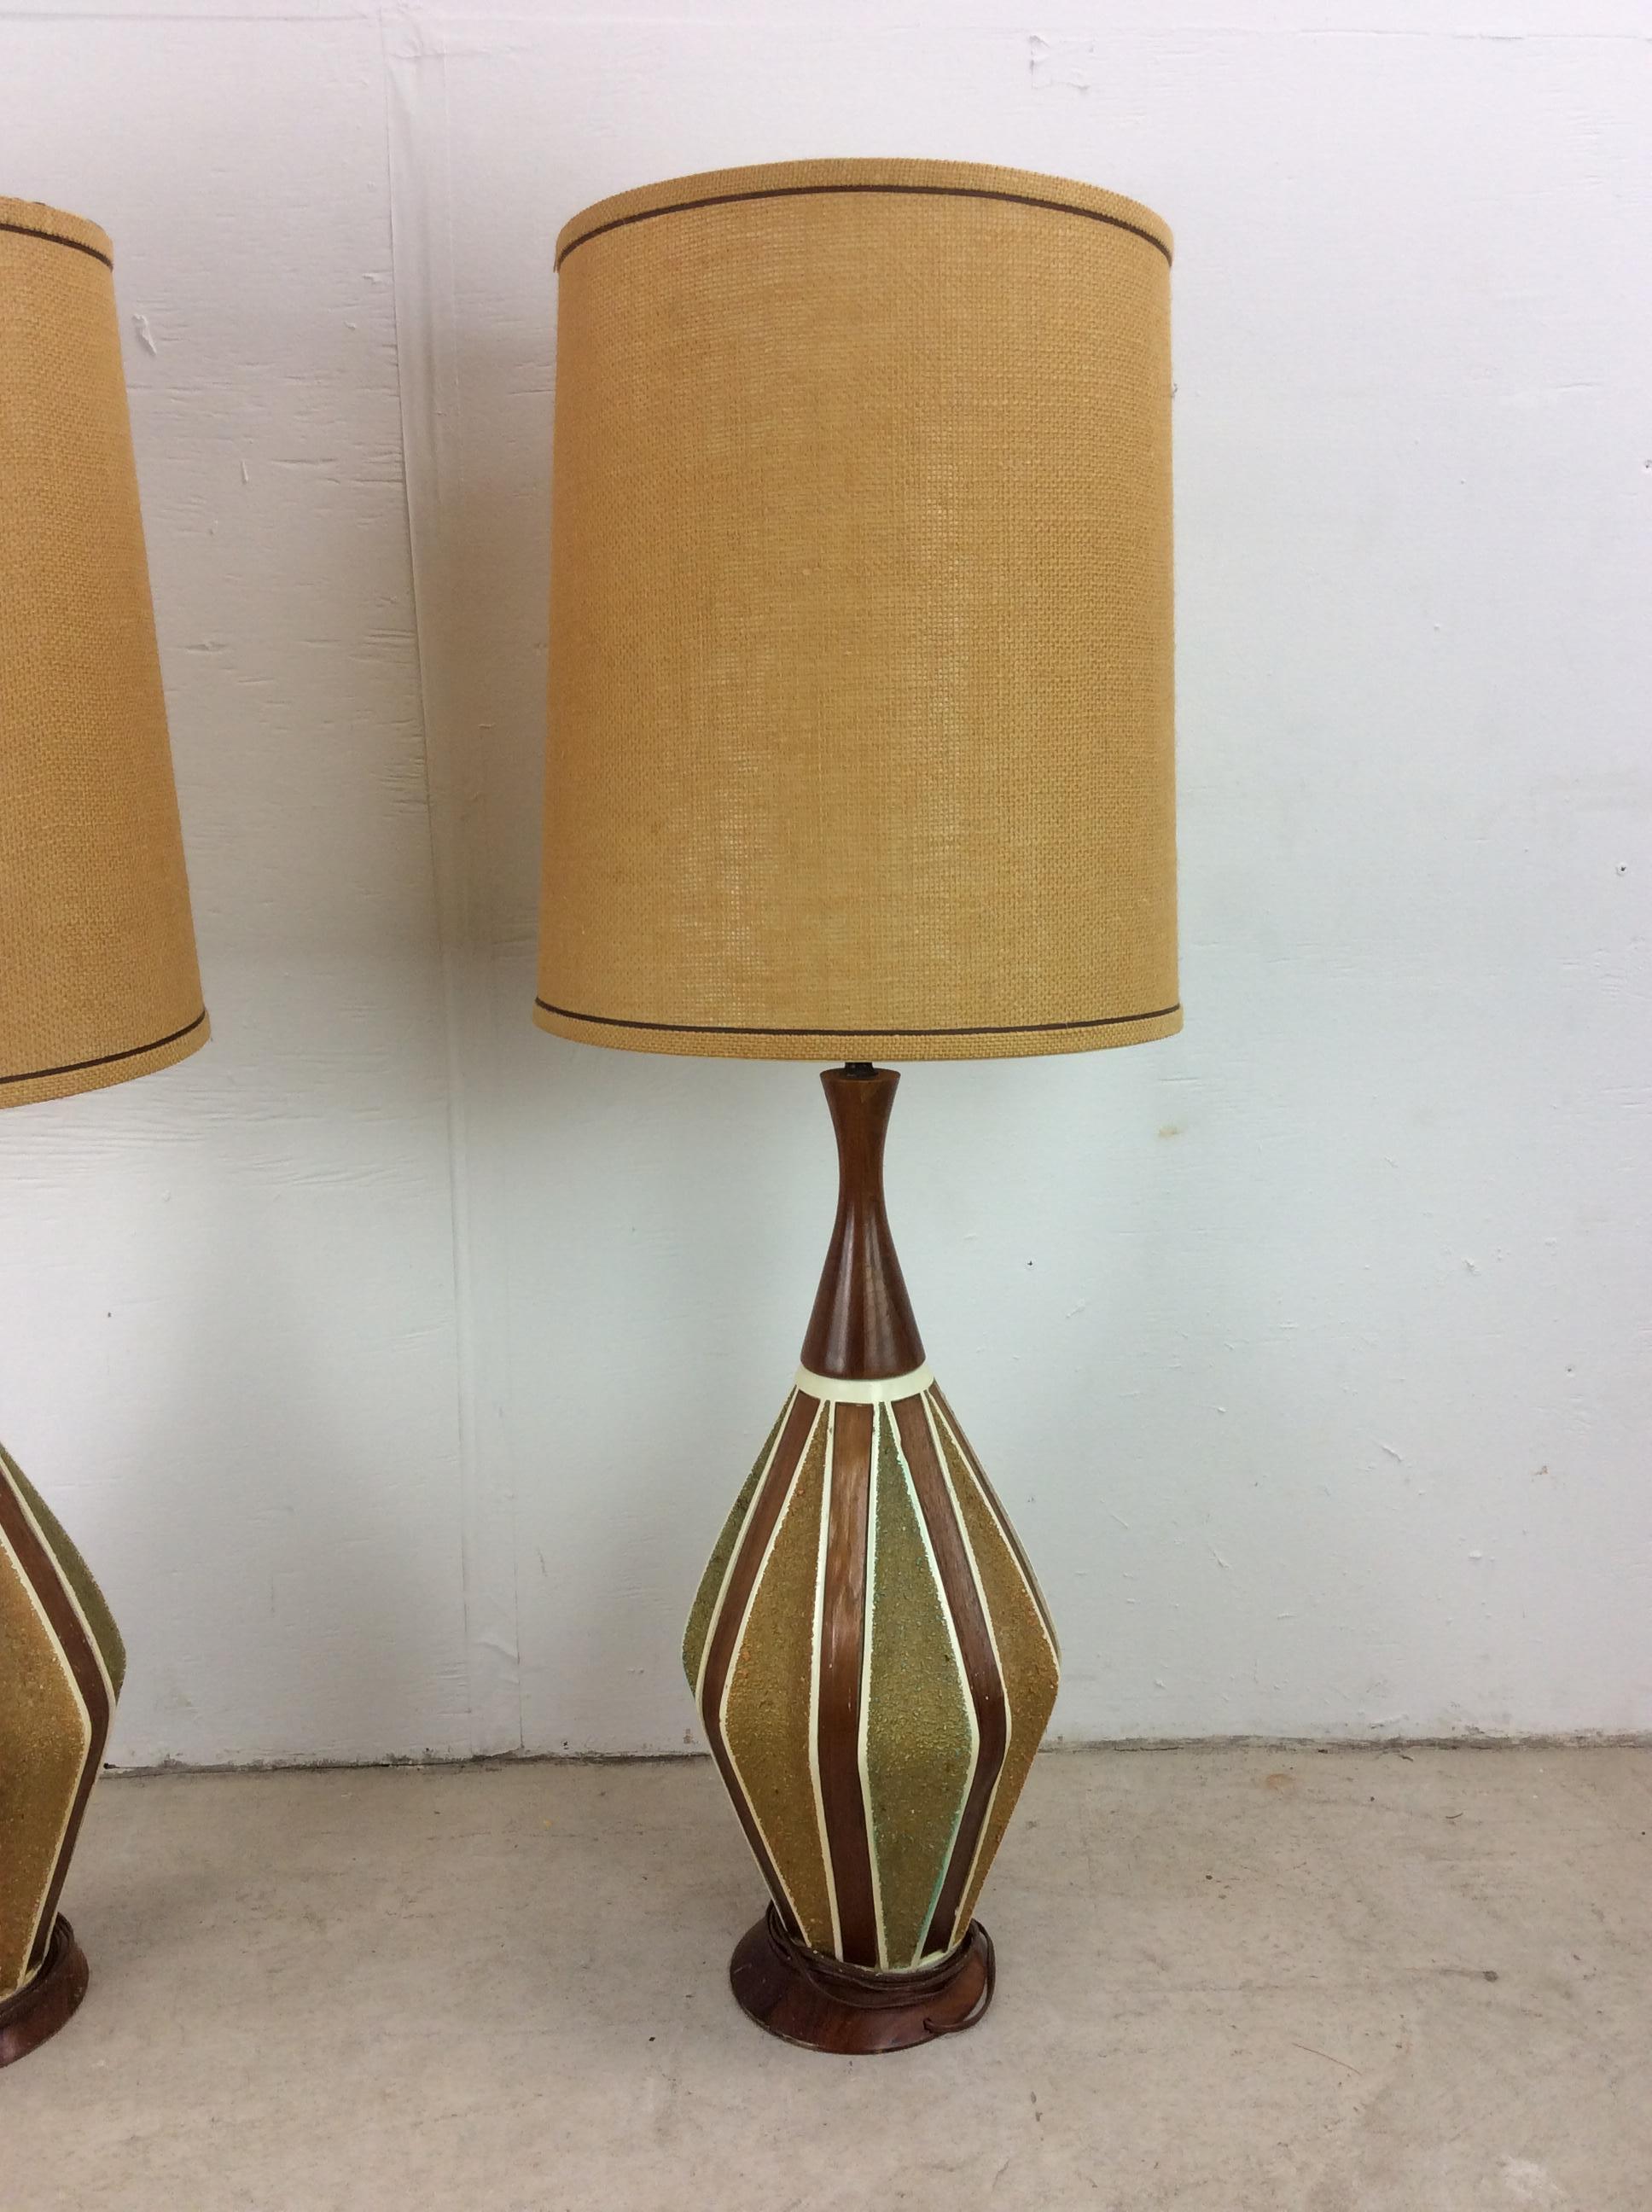 Pair of Mid Century Modern Ceramic Table Lamps with Barrel Shade For Sale 1